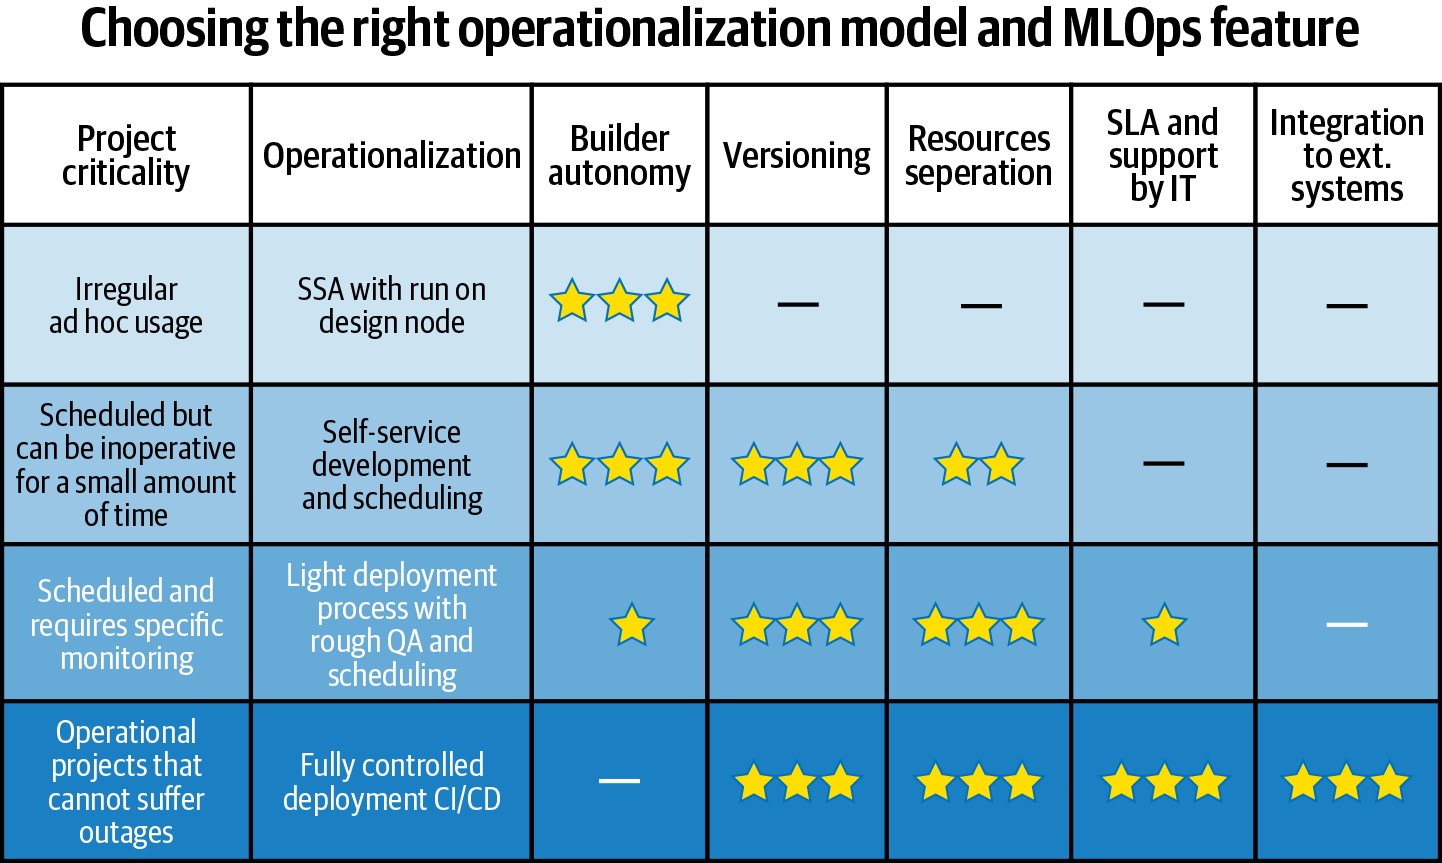 Choosing the right kind of operationalization model and MLOps features depending on the project s criticality.